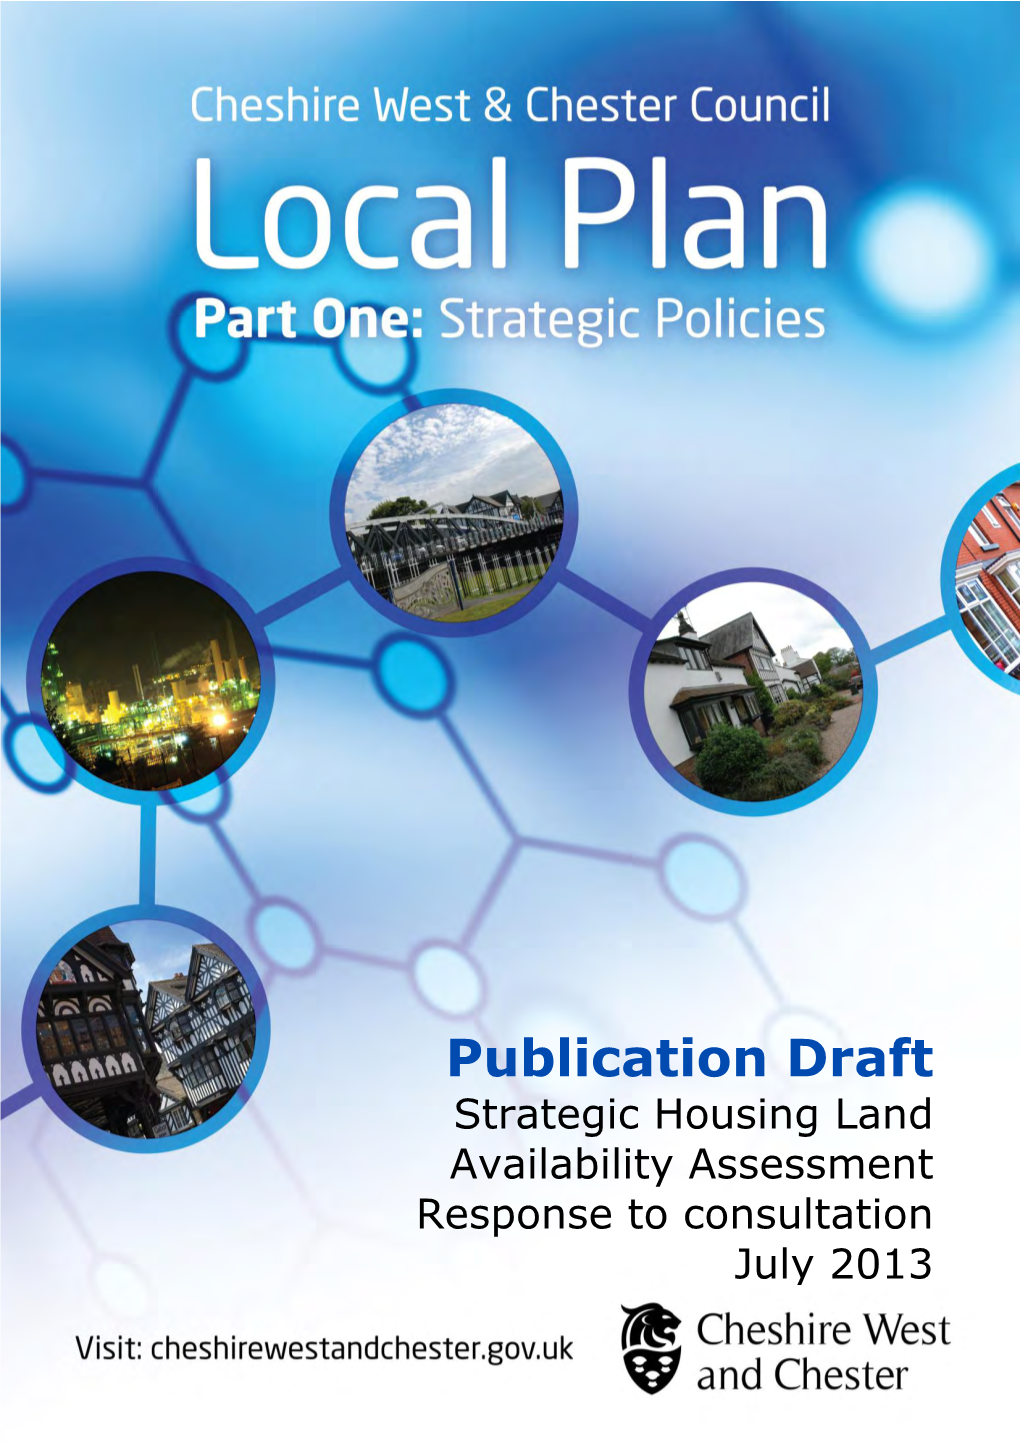 Publication Draft Strategic Housing Land Availability Assessment Response to Consultation July 2013